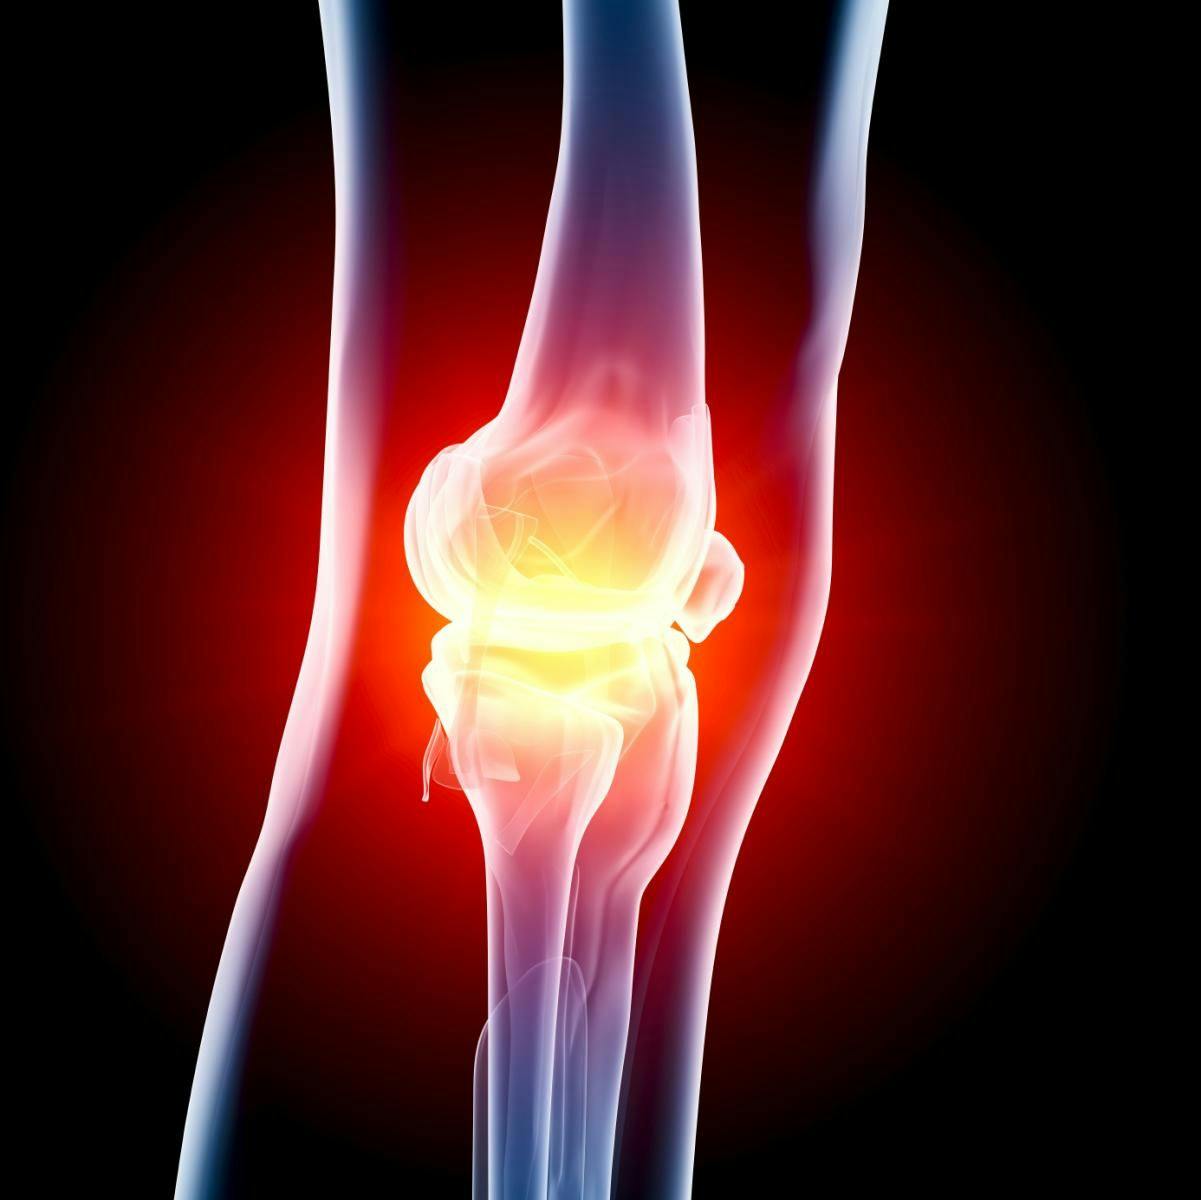 First Evidence that NEM Eggshell Membrane May Protect Joints (Rat Study)